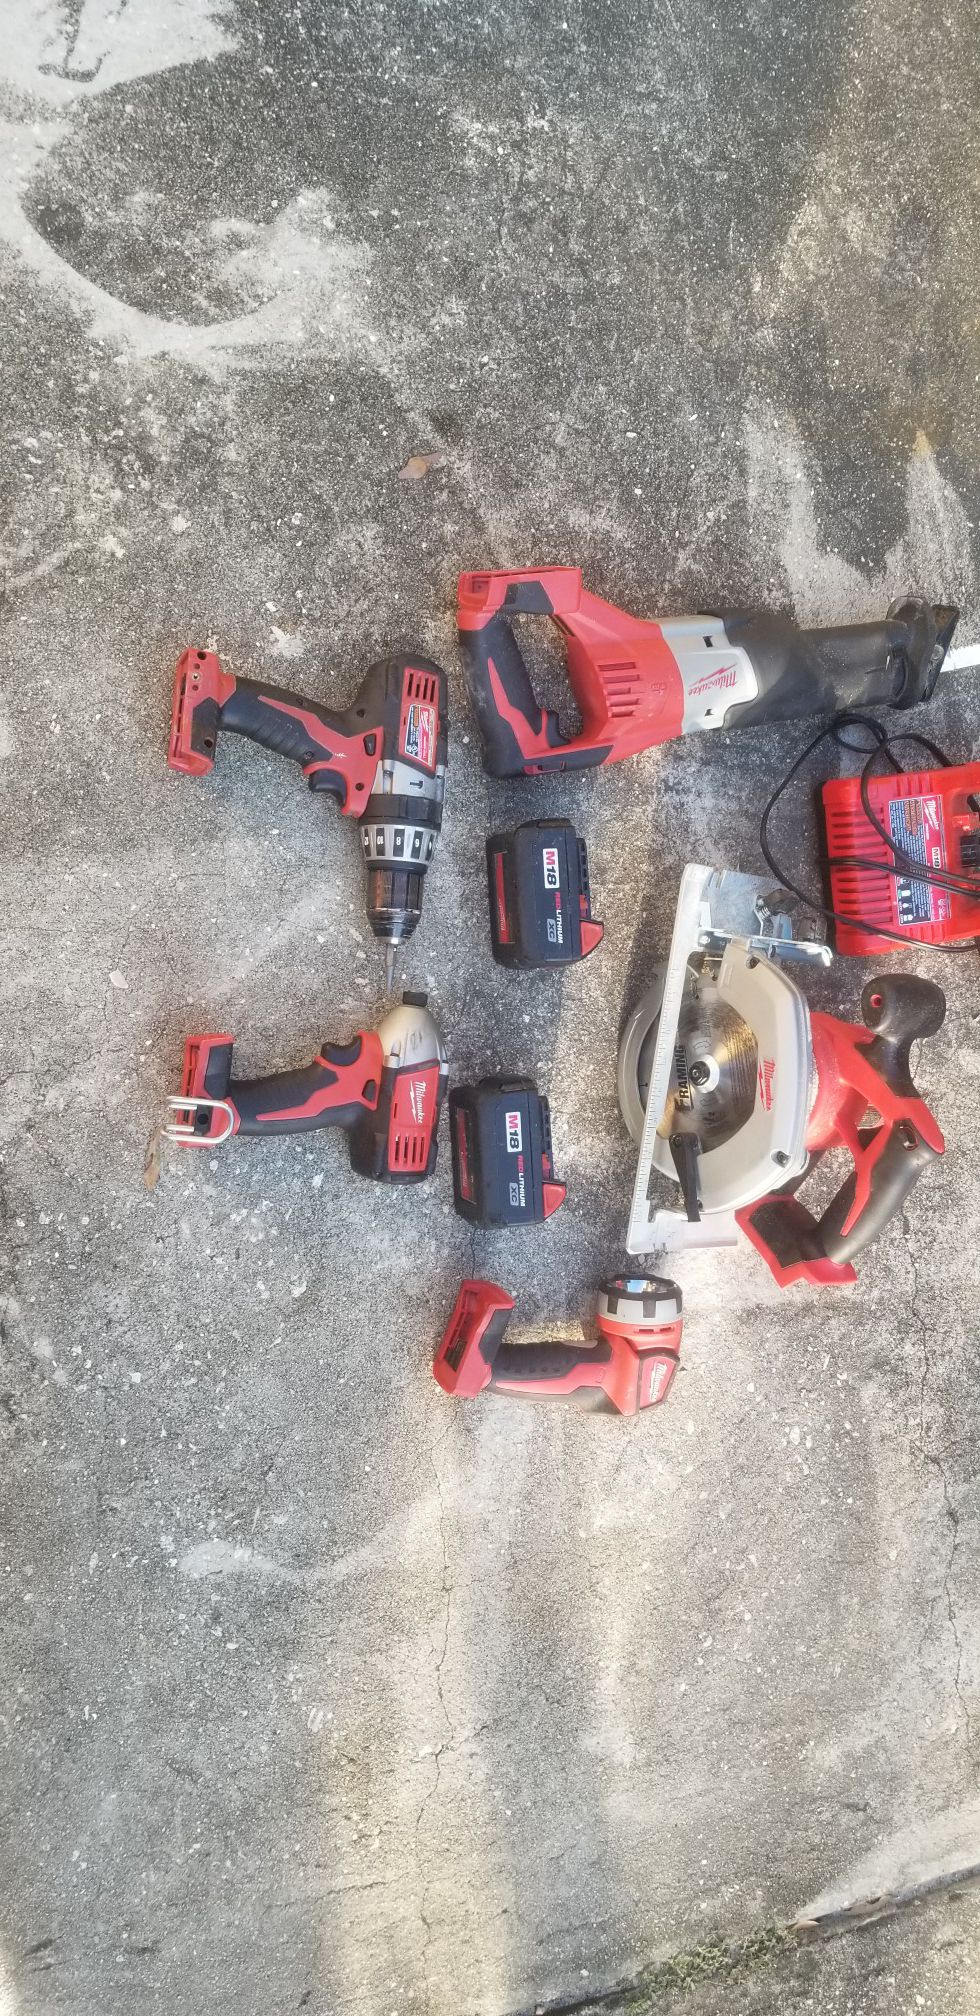 18 VOLT MILWAUKEE SET IMPACT +HUMMER DRILL+ SAWZALL+ CIRCULER SAW + FLASH LIGHT COME WITH 2 BATTERIES AND CHARGE